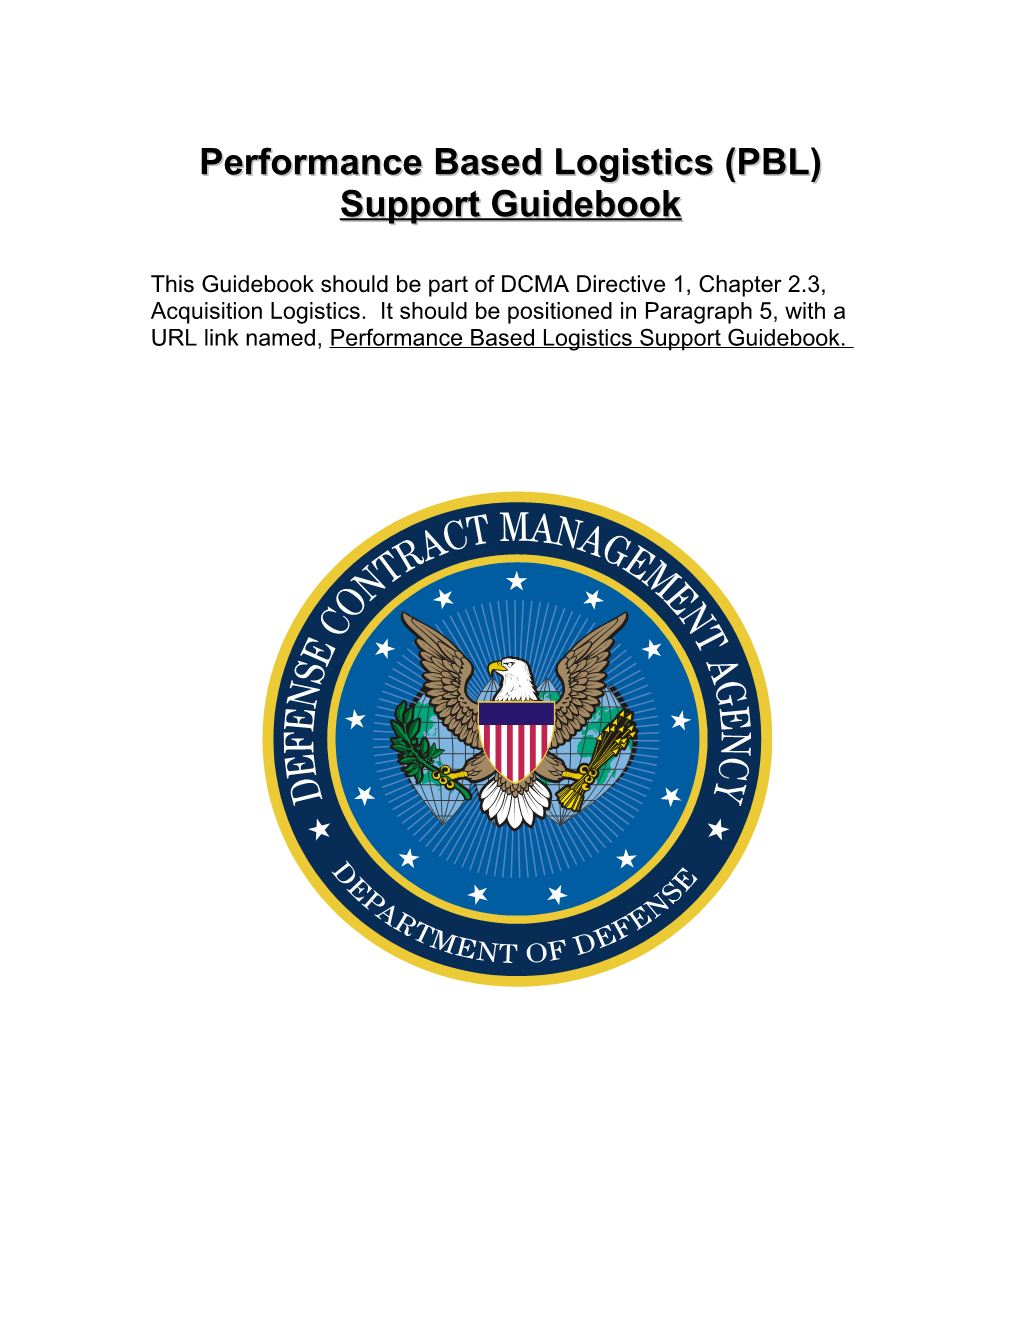 DCMA PBL Support Guidebook